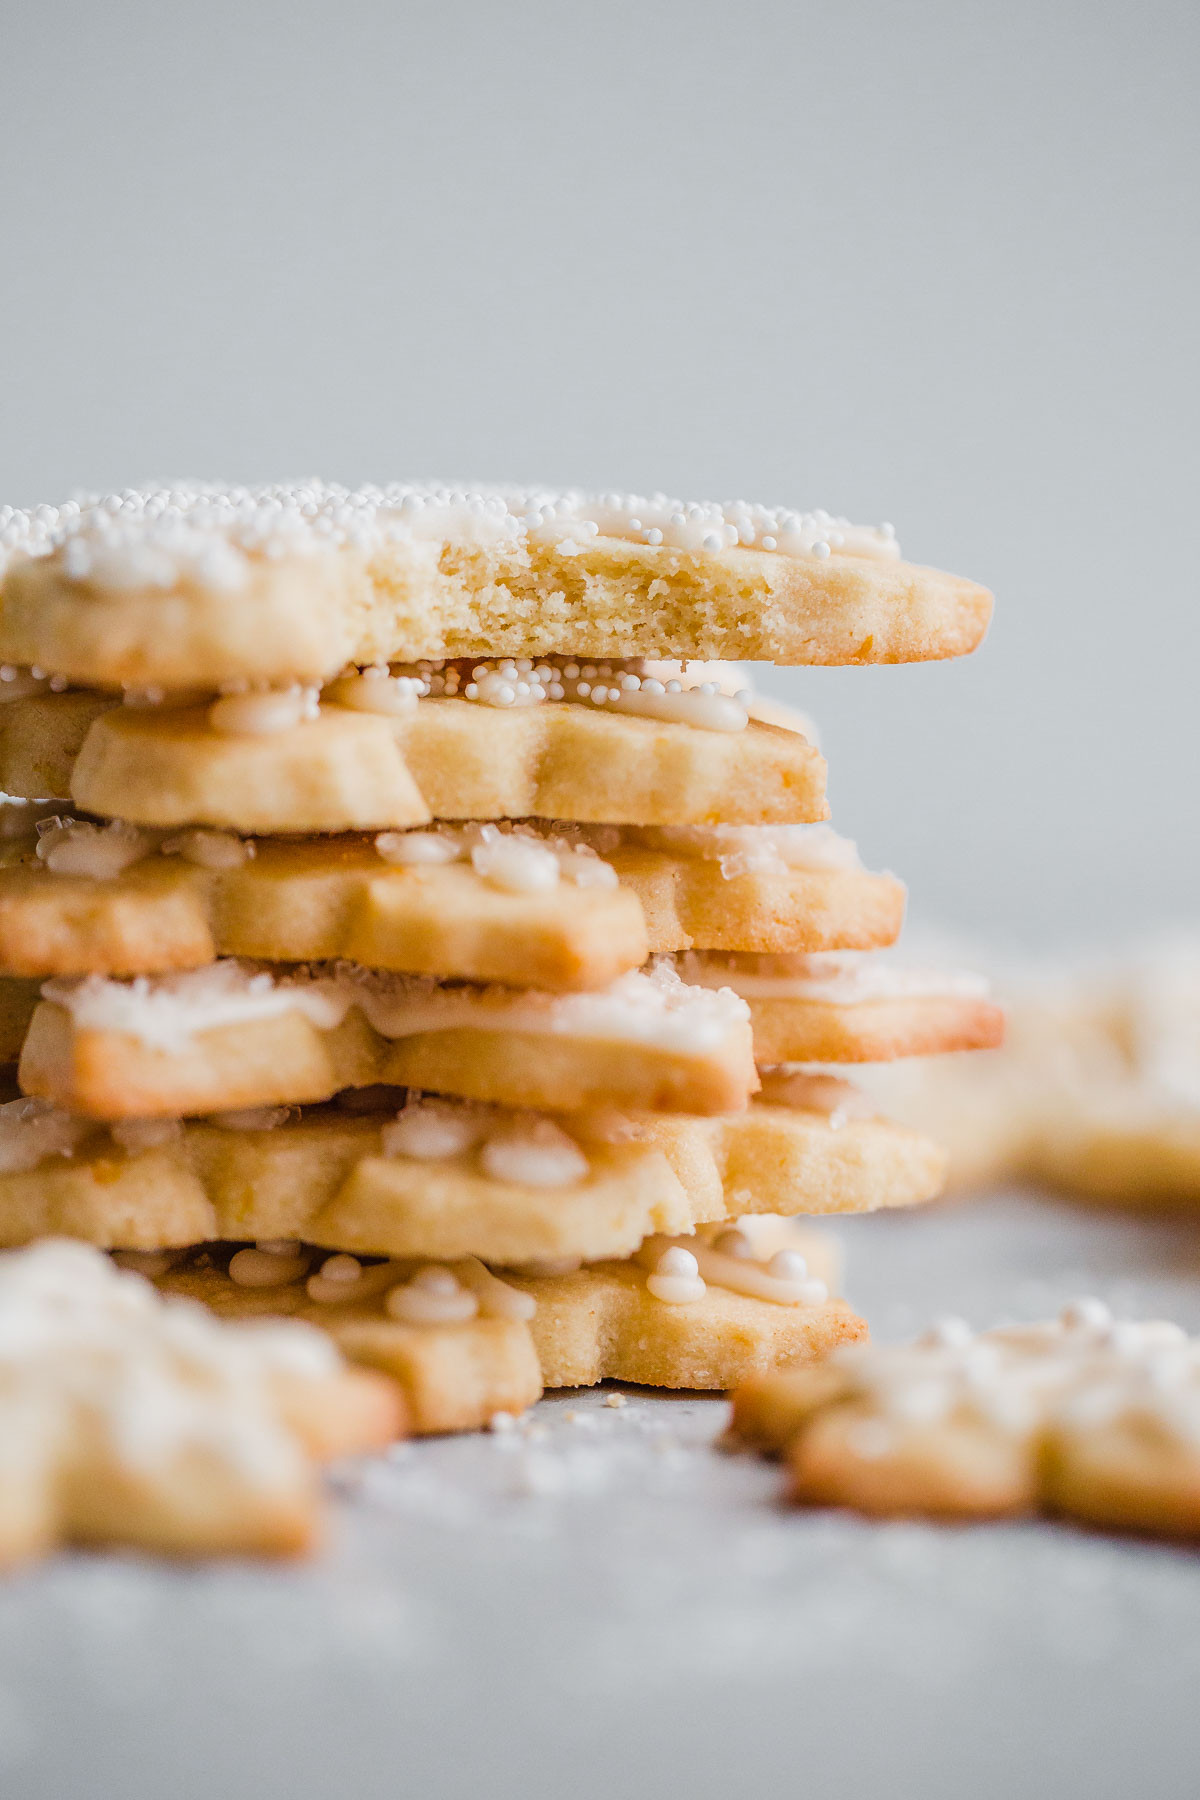 15 Delicious Sugar Cookies with Almond Extract